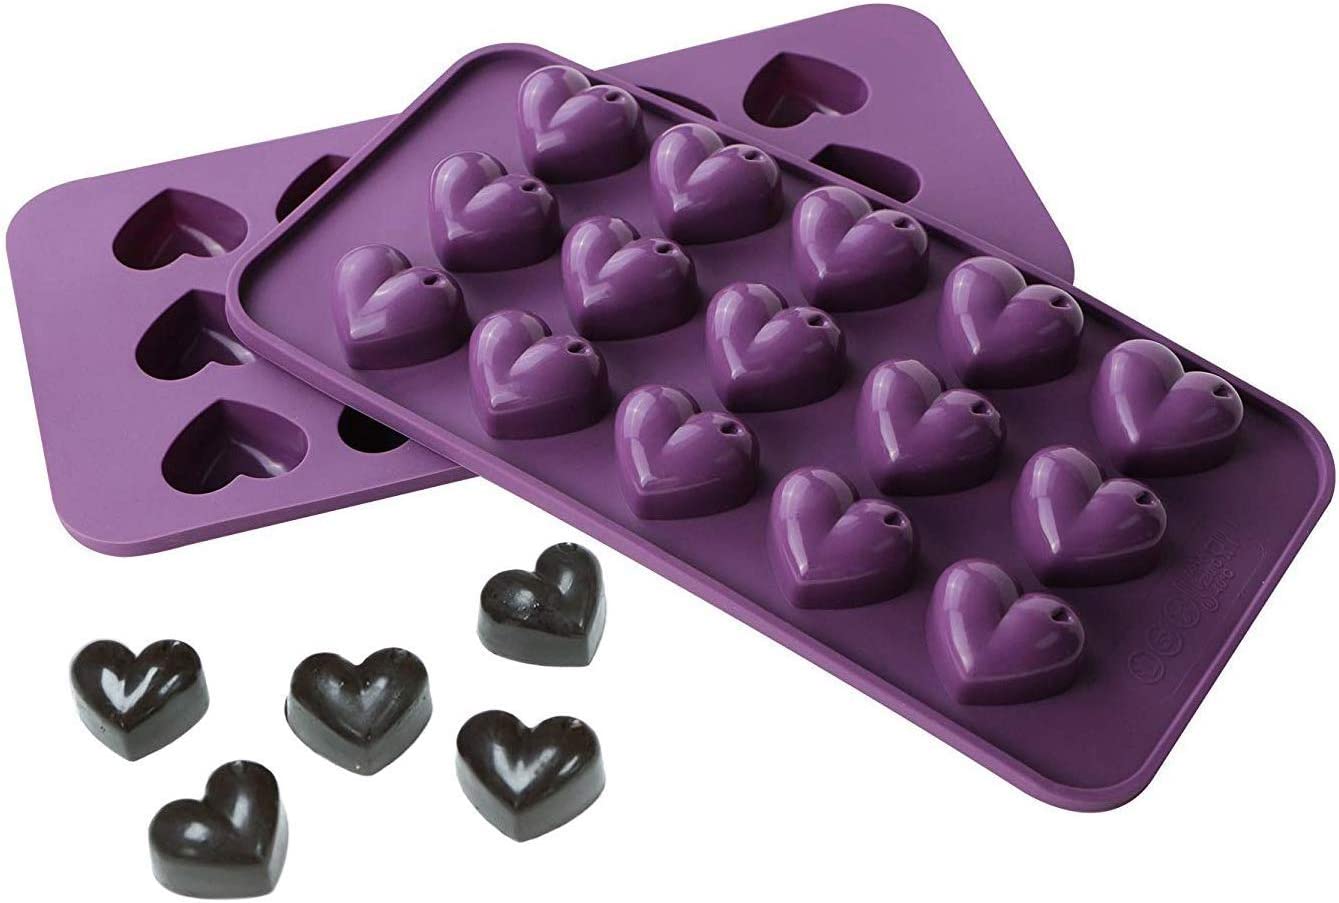 Webake Silicone 15 Cavity Silicone Heart  Candy Chocolate Mold,Pack of 2 (Purple)